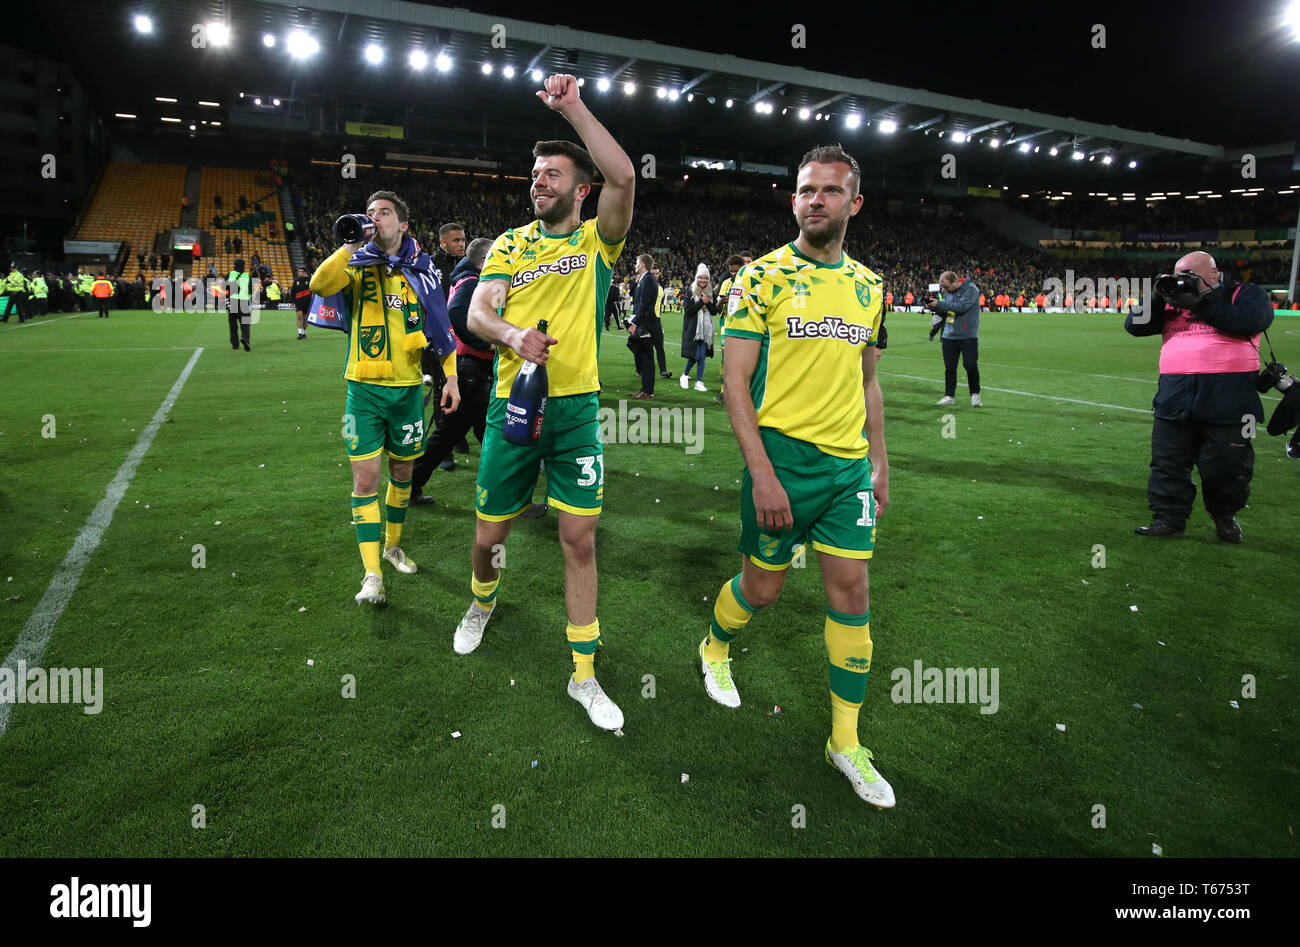 Norwich City's Kenny McLean, Norwich City's Grant Hanley and Norwich City's Jordan Rhodes celebrate promotion to the Premier League after the final whistle of the Sky Bet Championship match at Carrow Road, Norwich. Stock Photo